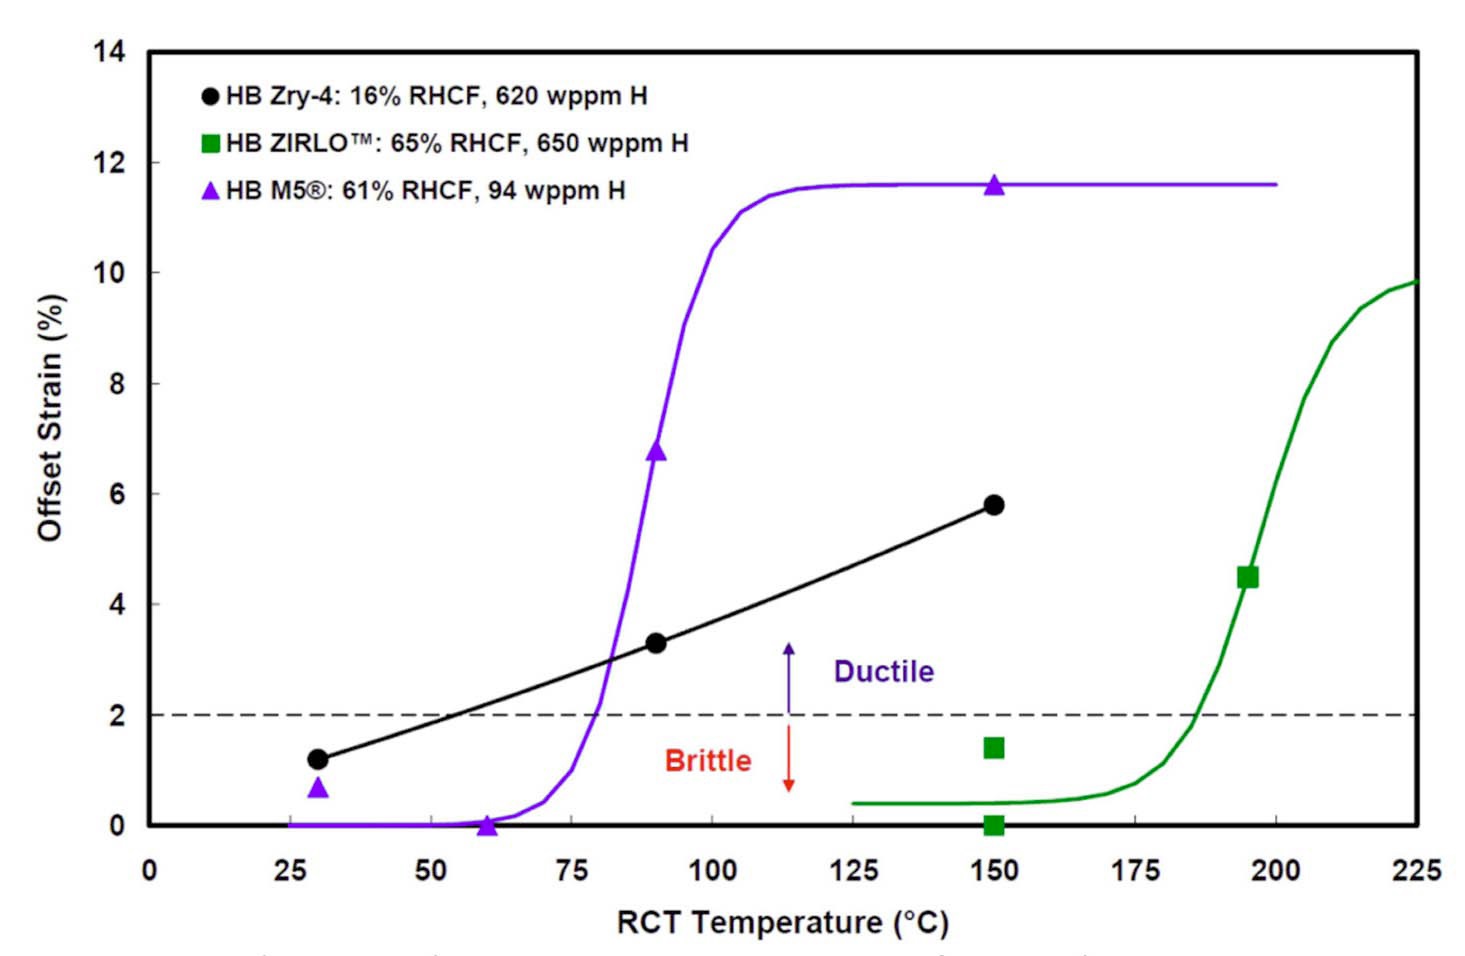 Ductile to Brittle Transition Temperatures for Zircaloy 4, ZIRLO™, and M5® Cladding [8]